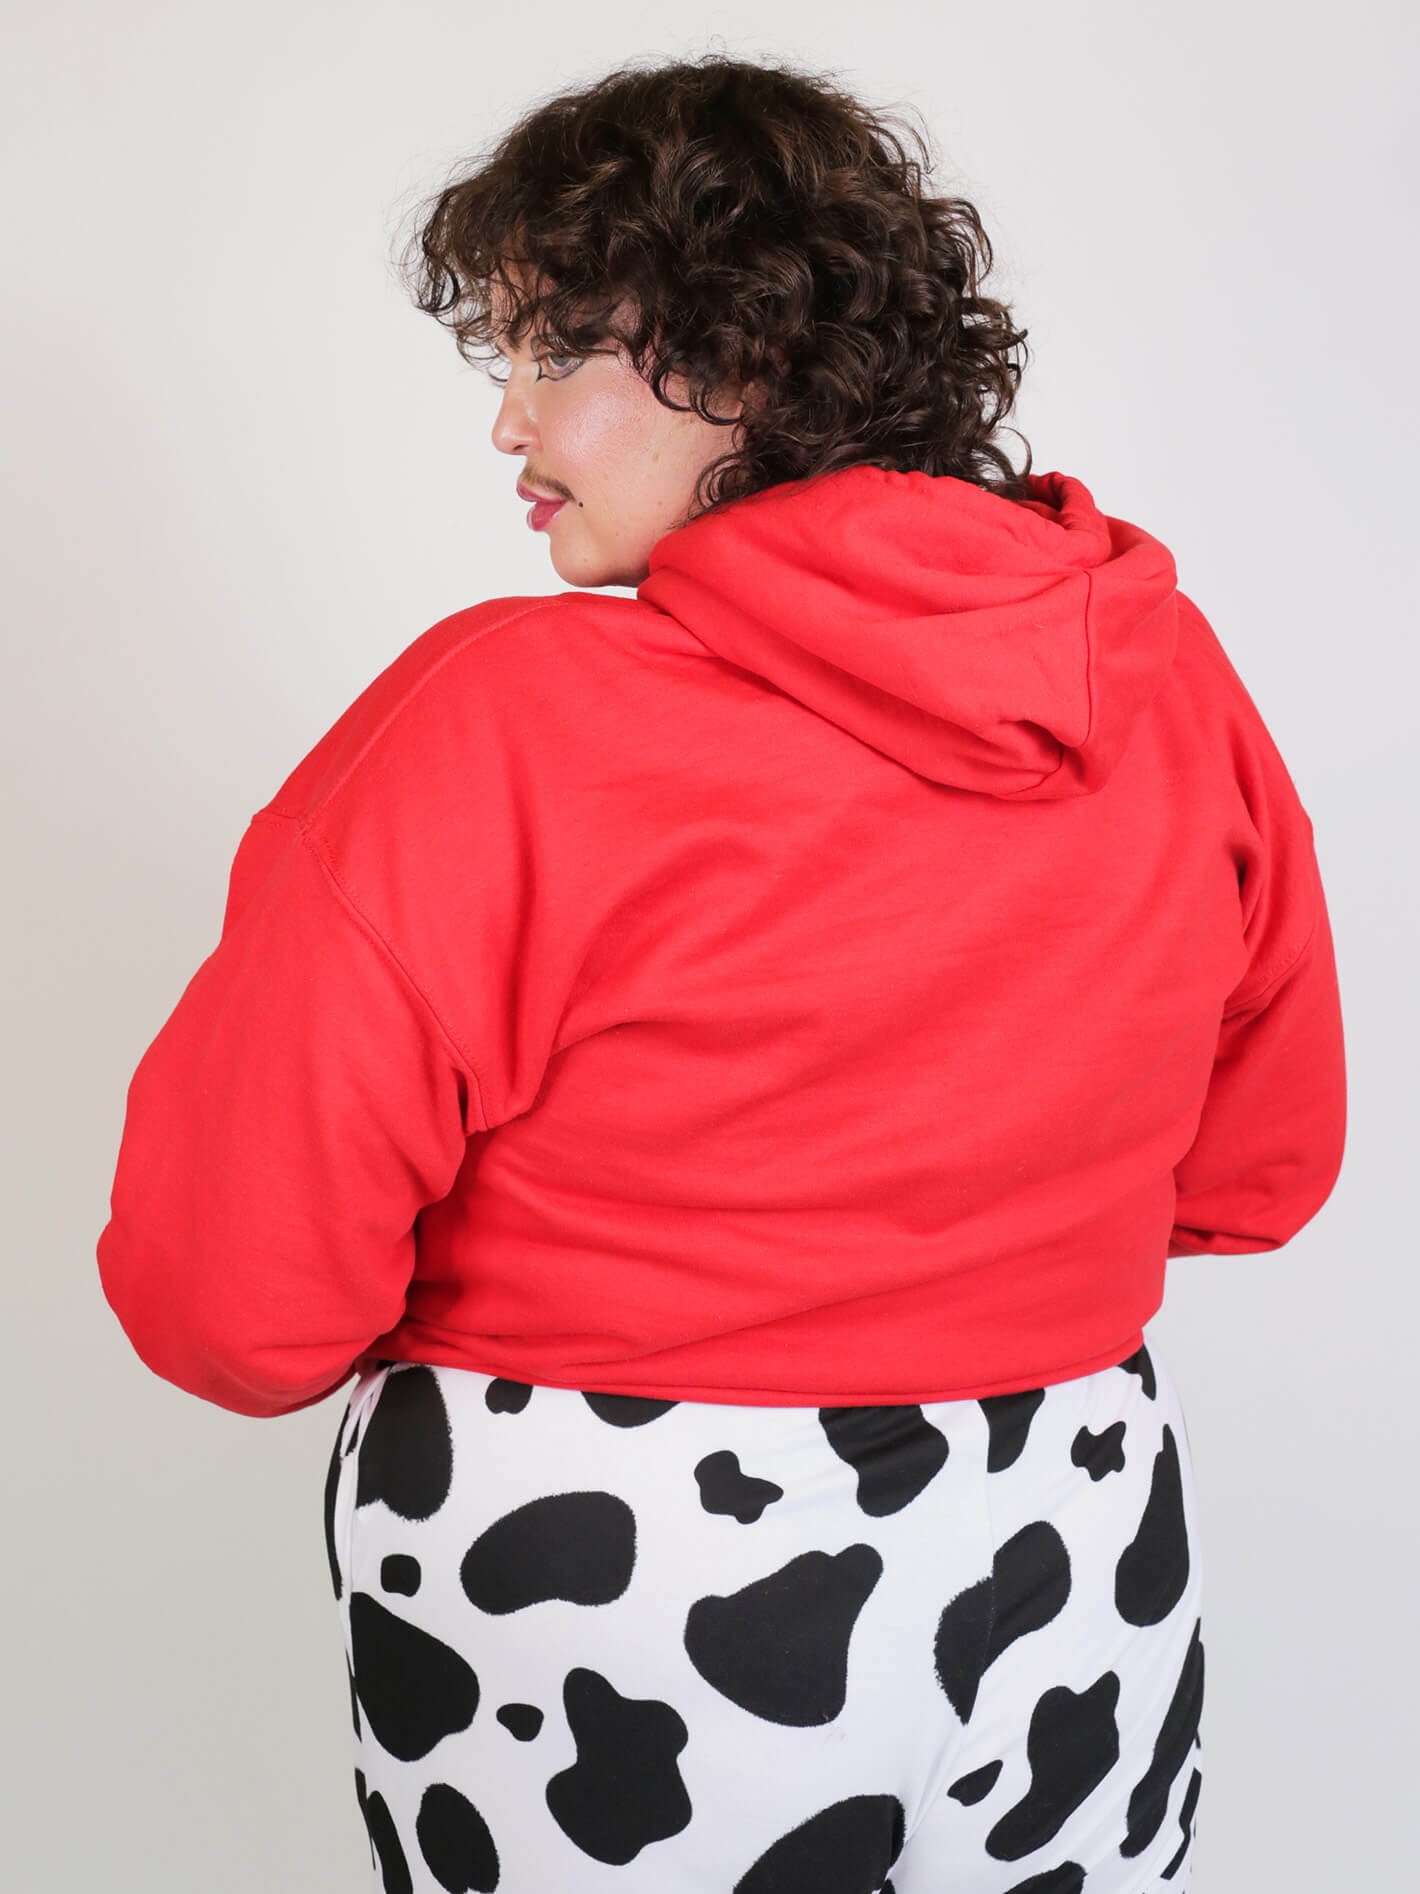 Plus size red hoodie.